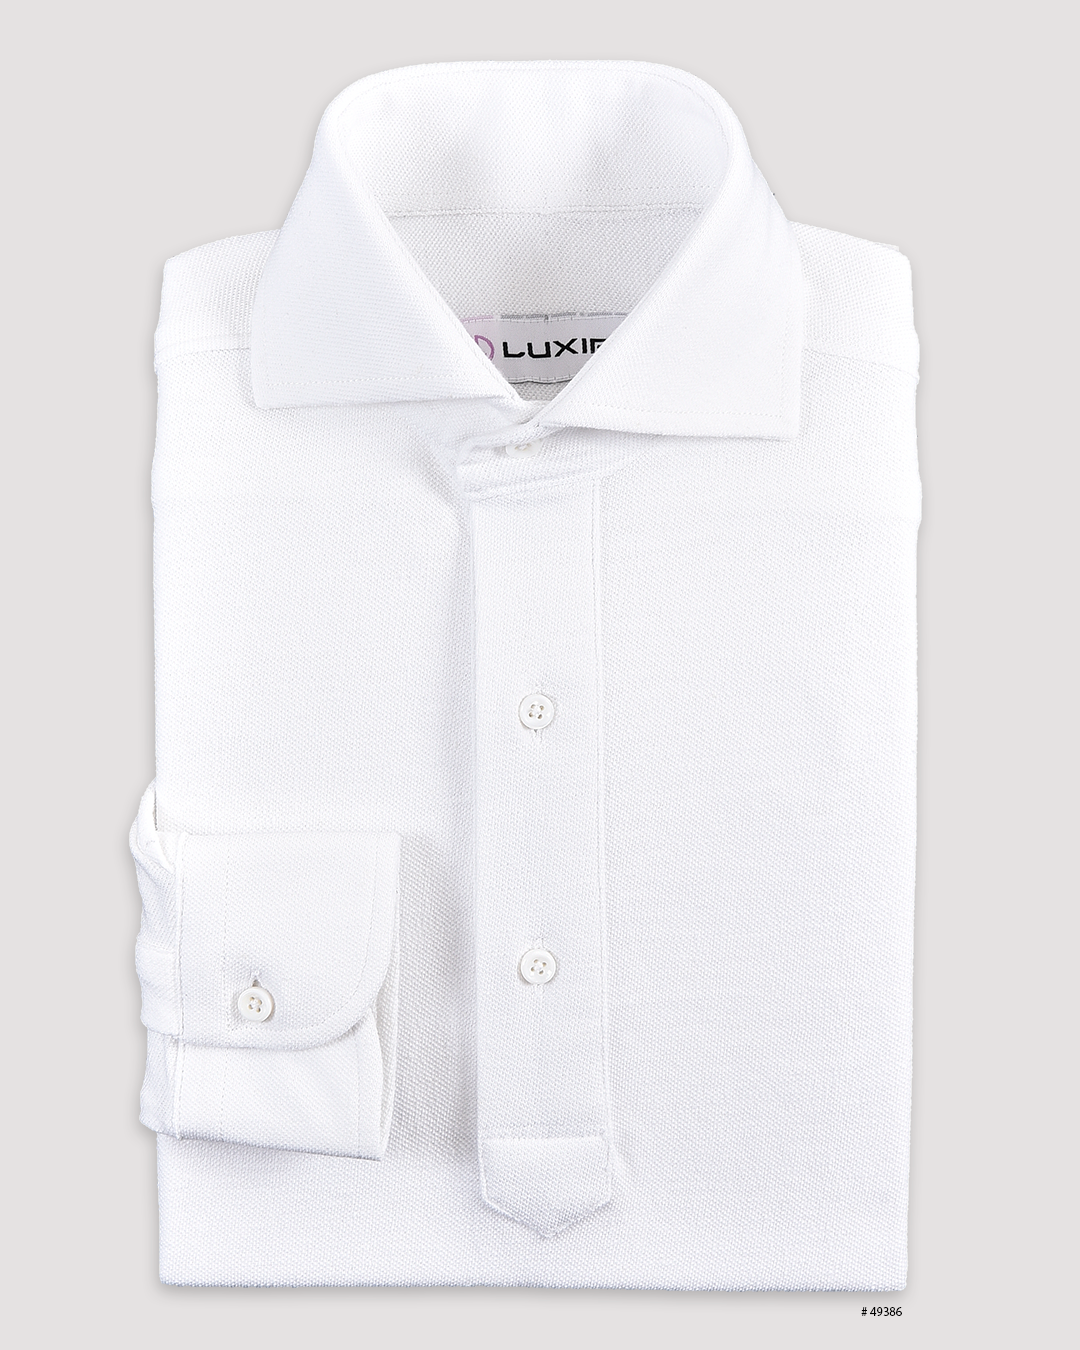 Front of the custom oxford polo shirt for men by Luxire in pure white